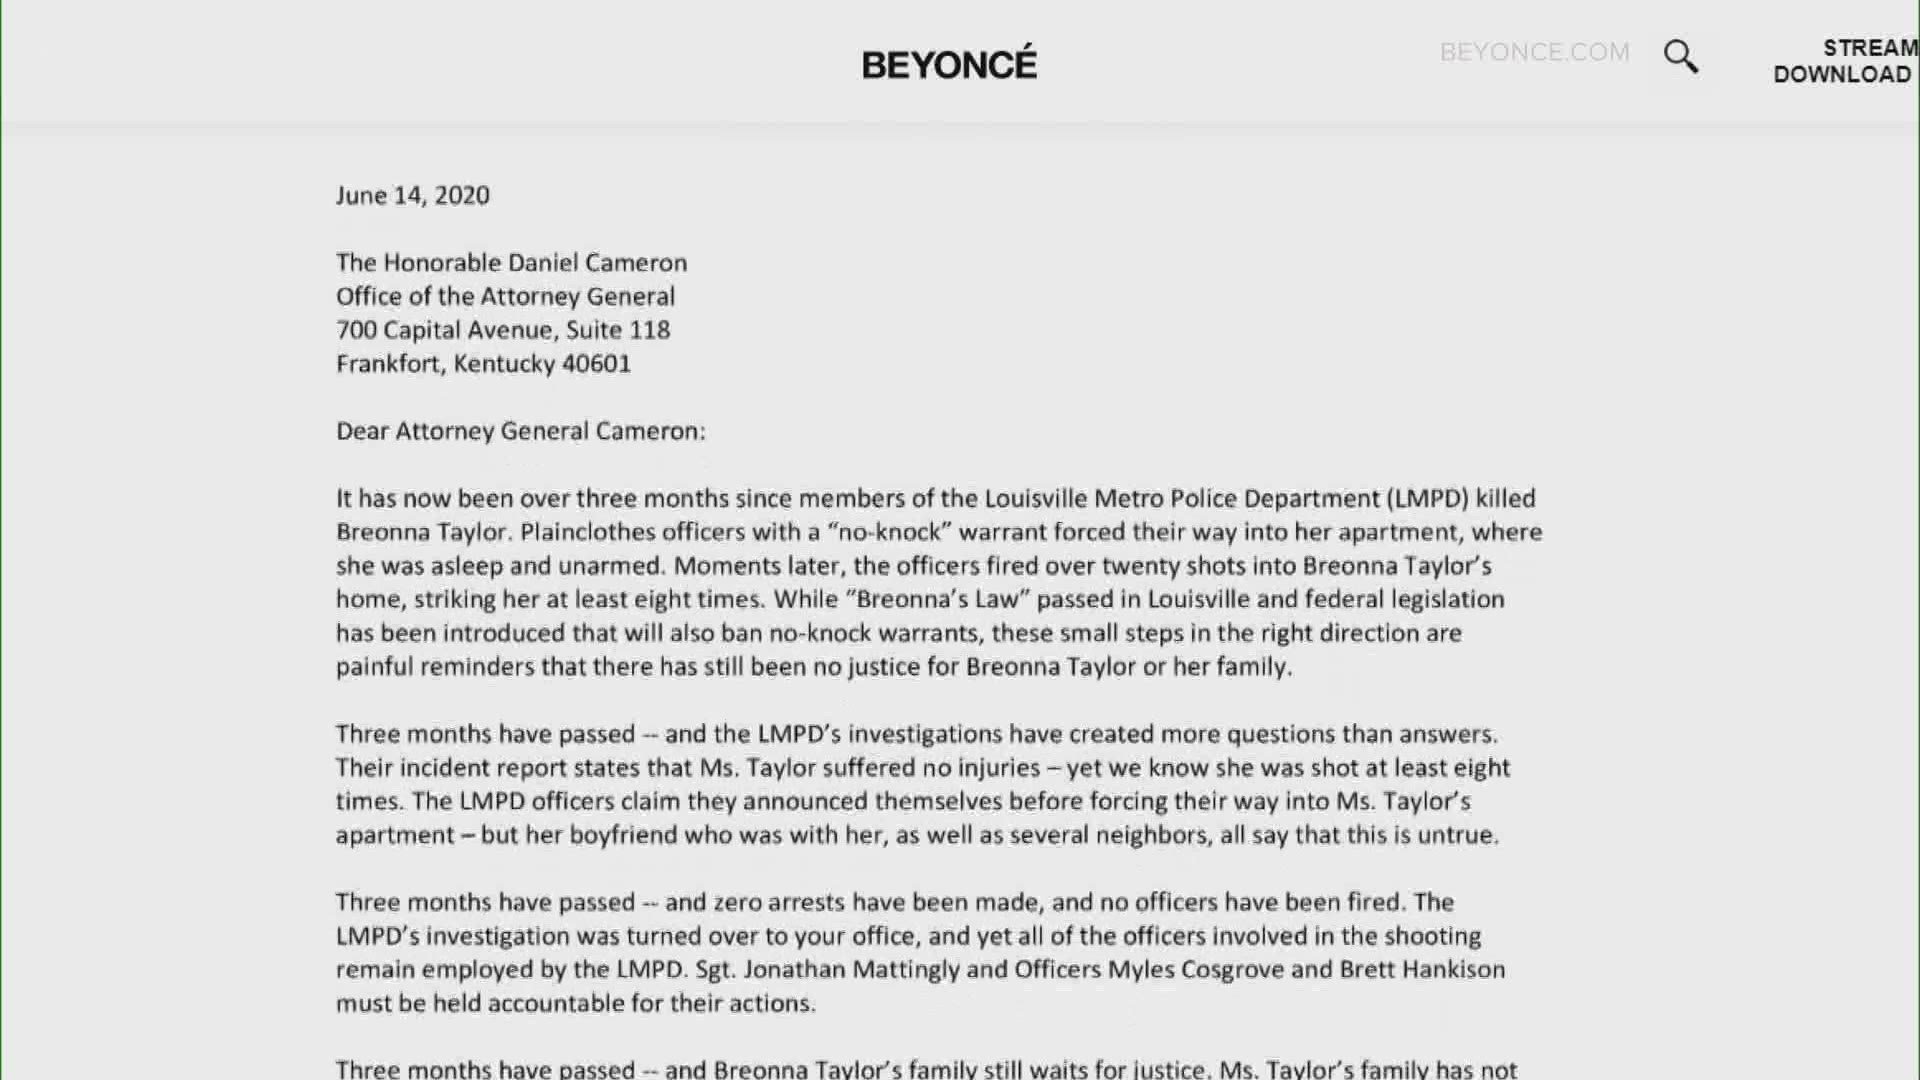 In an open letter to Kentucky Attorney General Daniel Cameron, Beyonce asks Cameron to file charges against the officers.